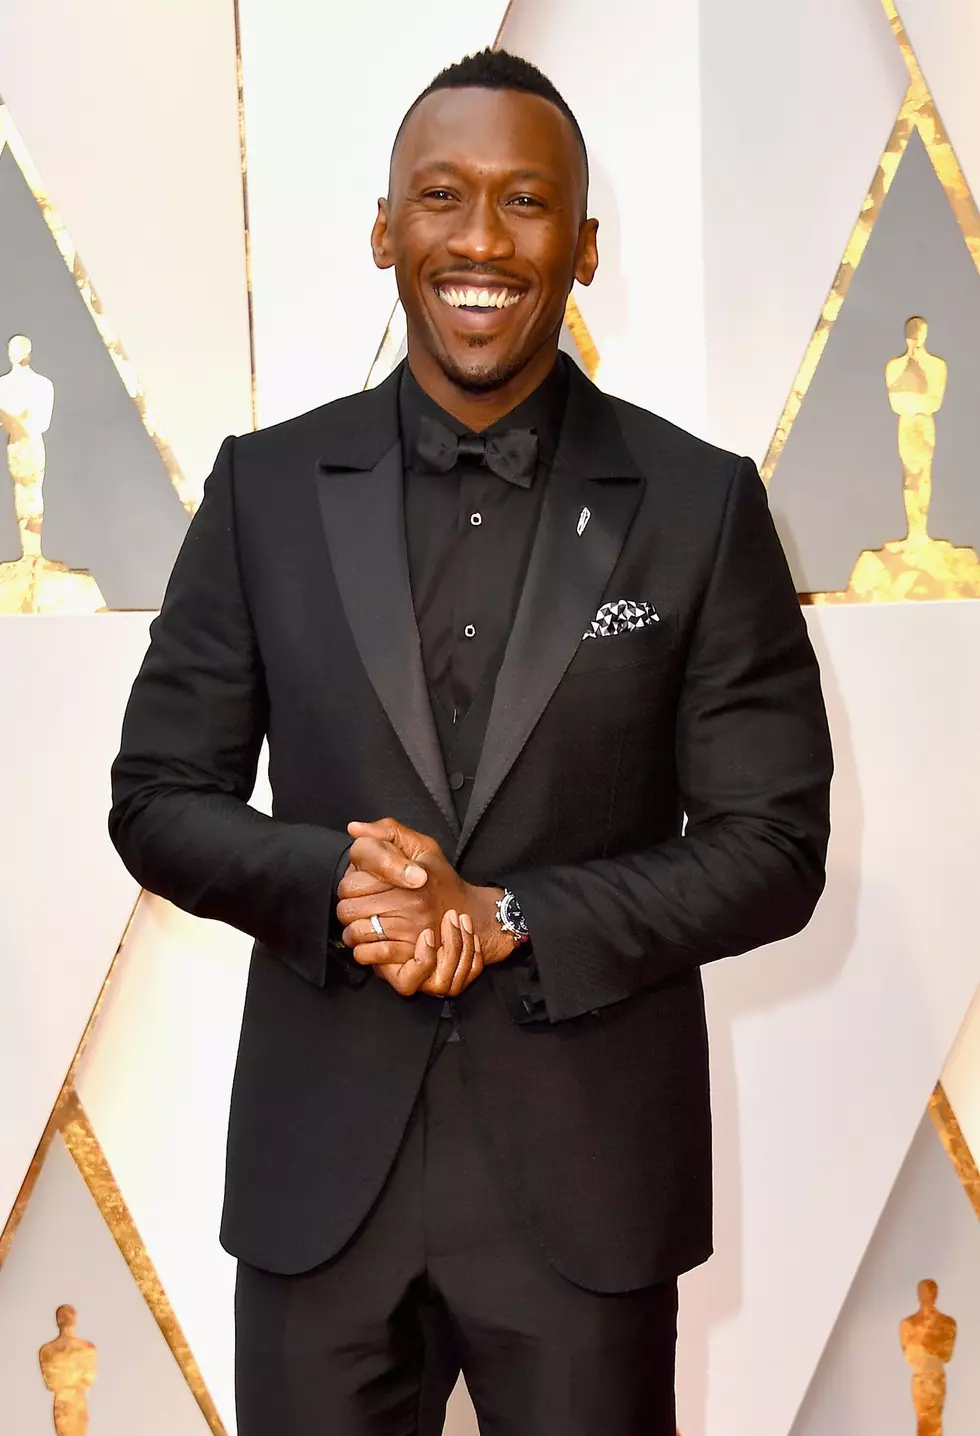 Mahershala Ali Wins Best Supporting Actor Winner at the 2017 Oscars